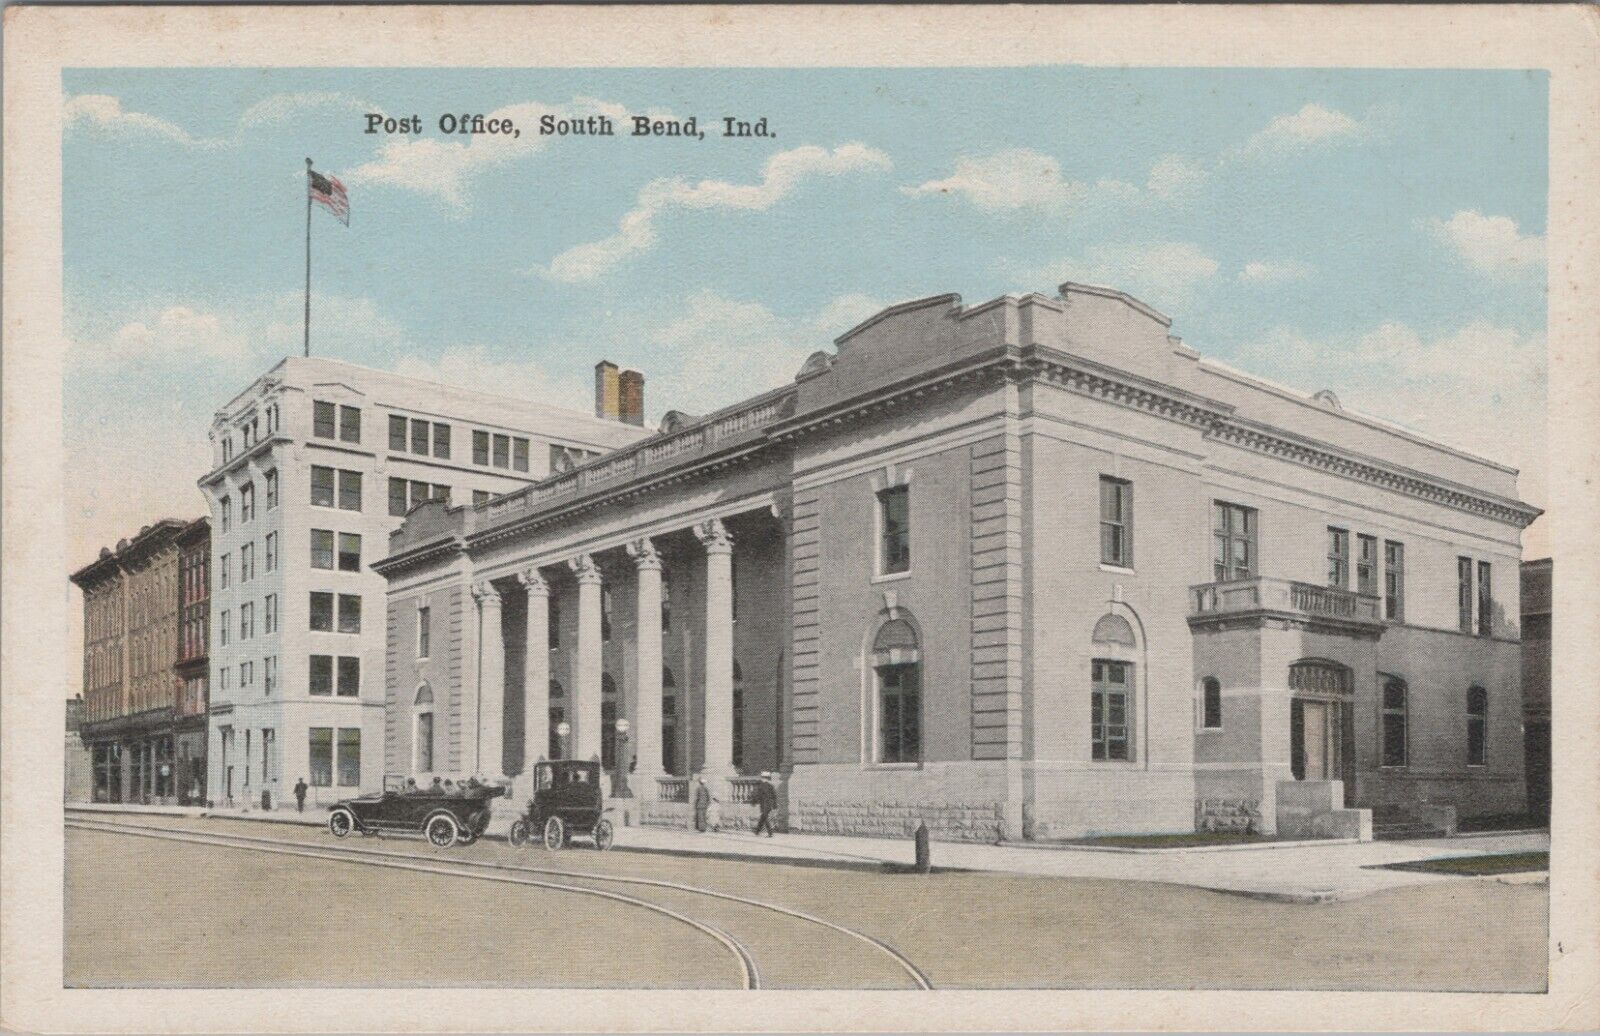 Post Office South Bend IN Trolley Tracks Autos Indiana c1920s WB postcard G898